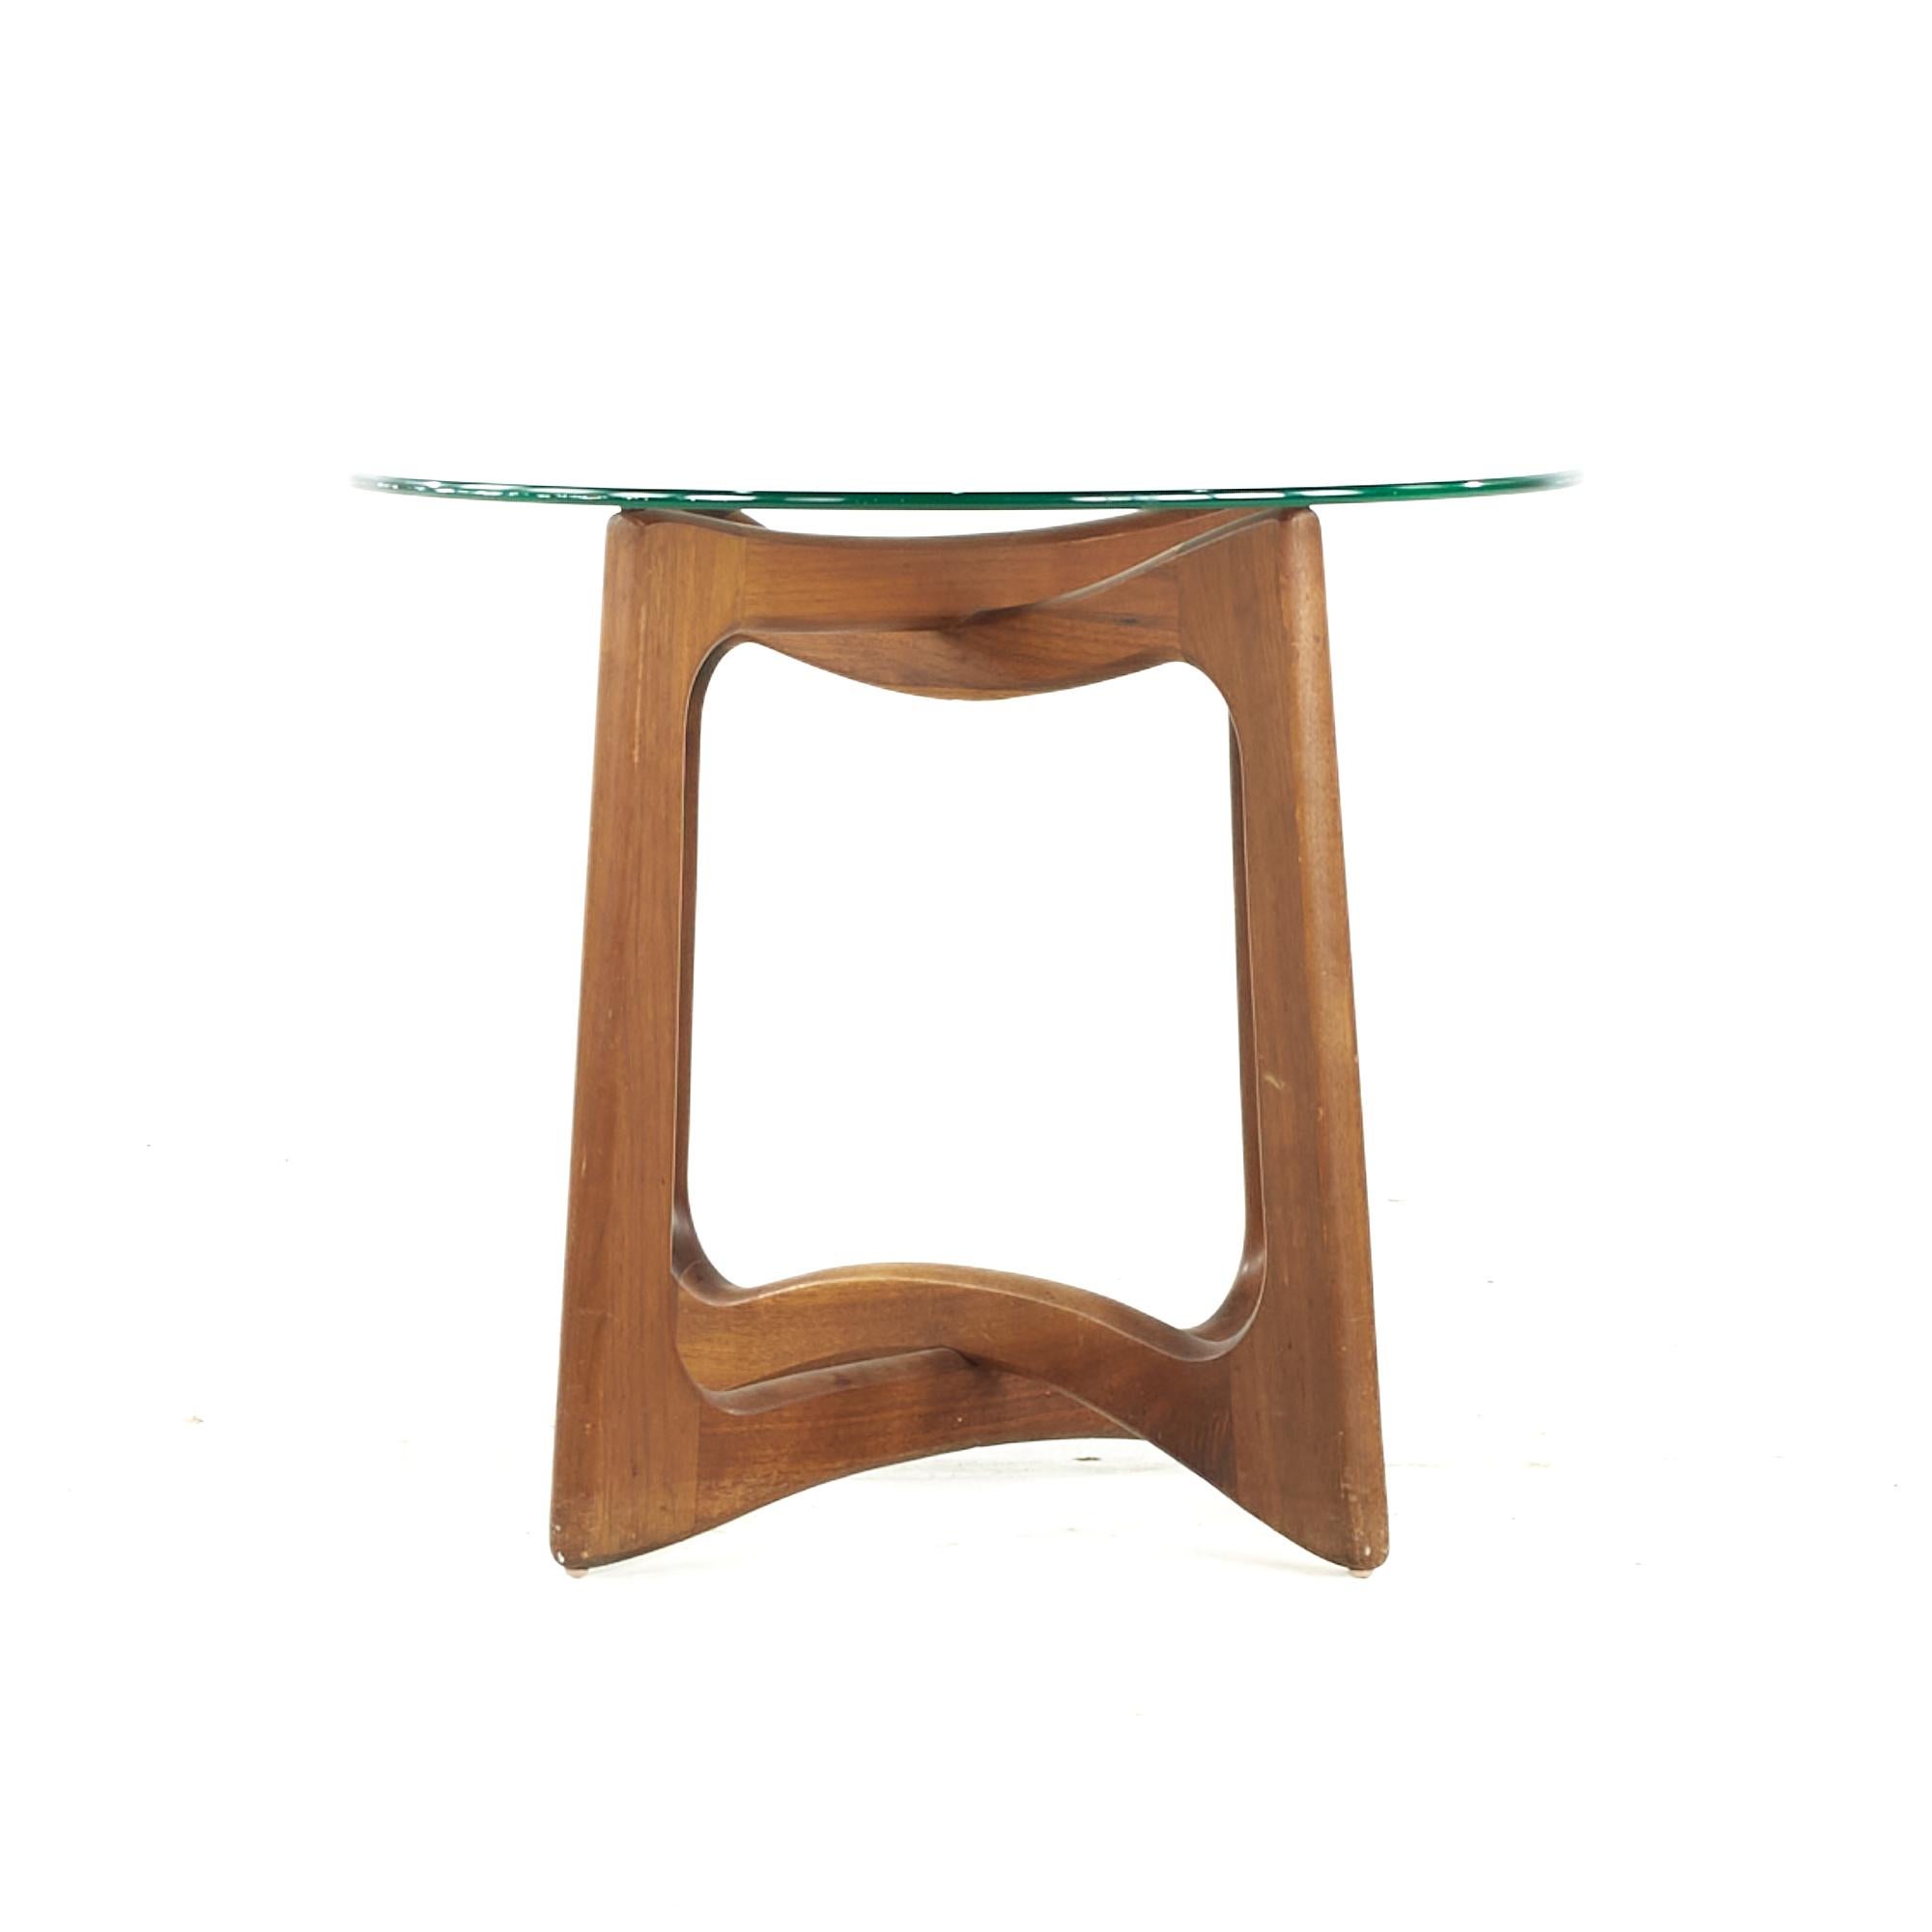 Adrian Pearsall Midcentury Walnut and Glass Side Tables, Pair For Sale 1